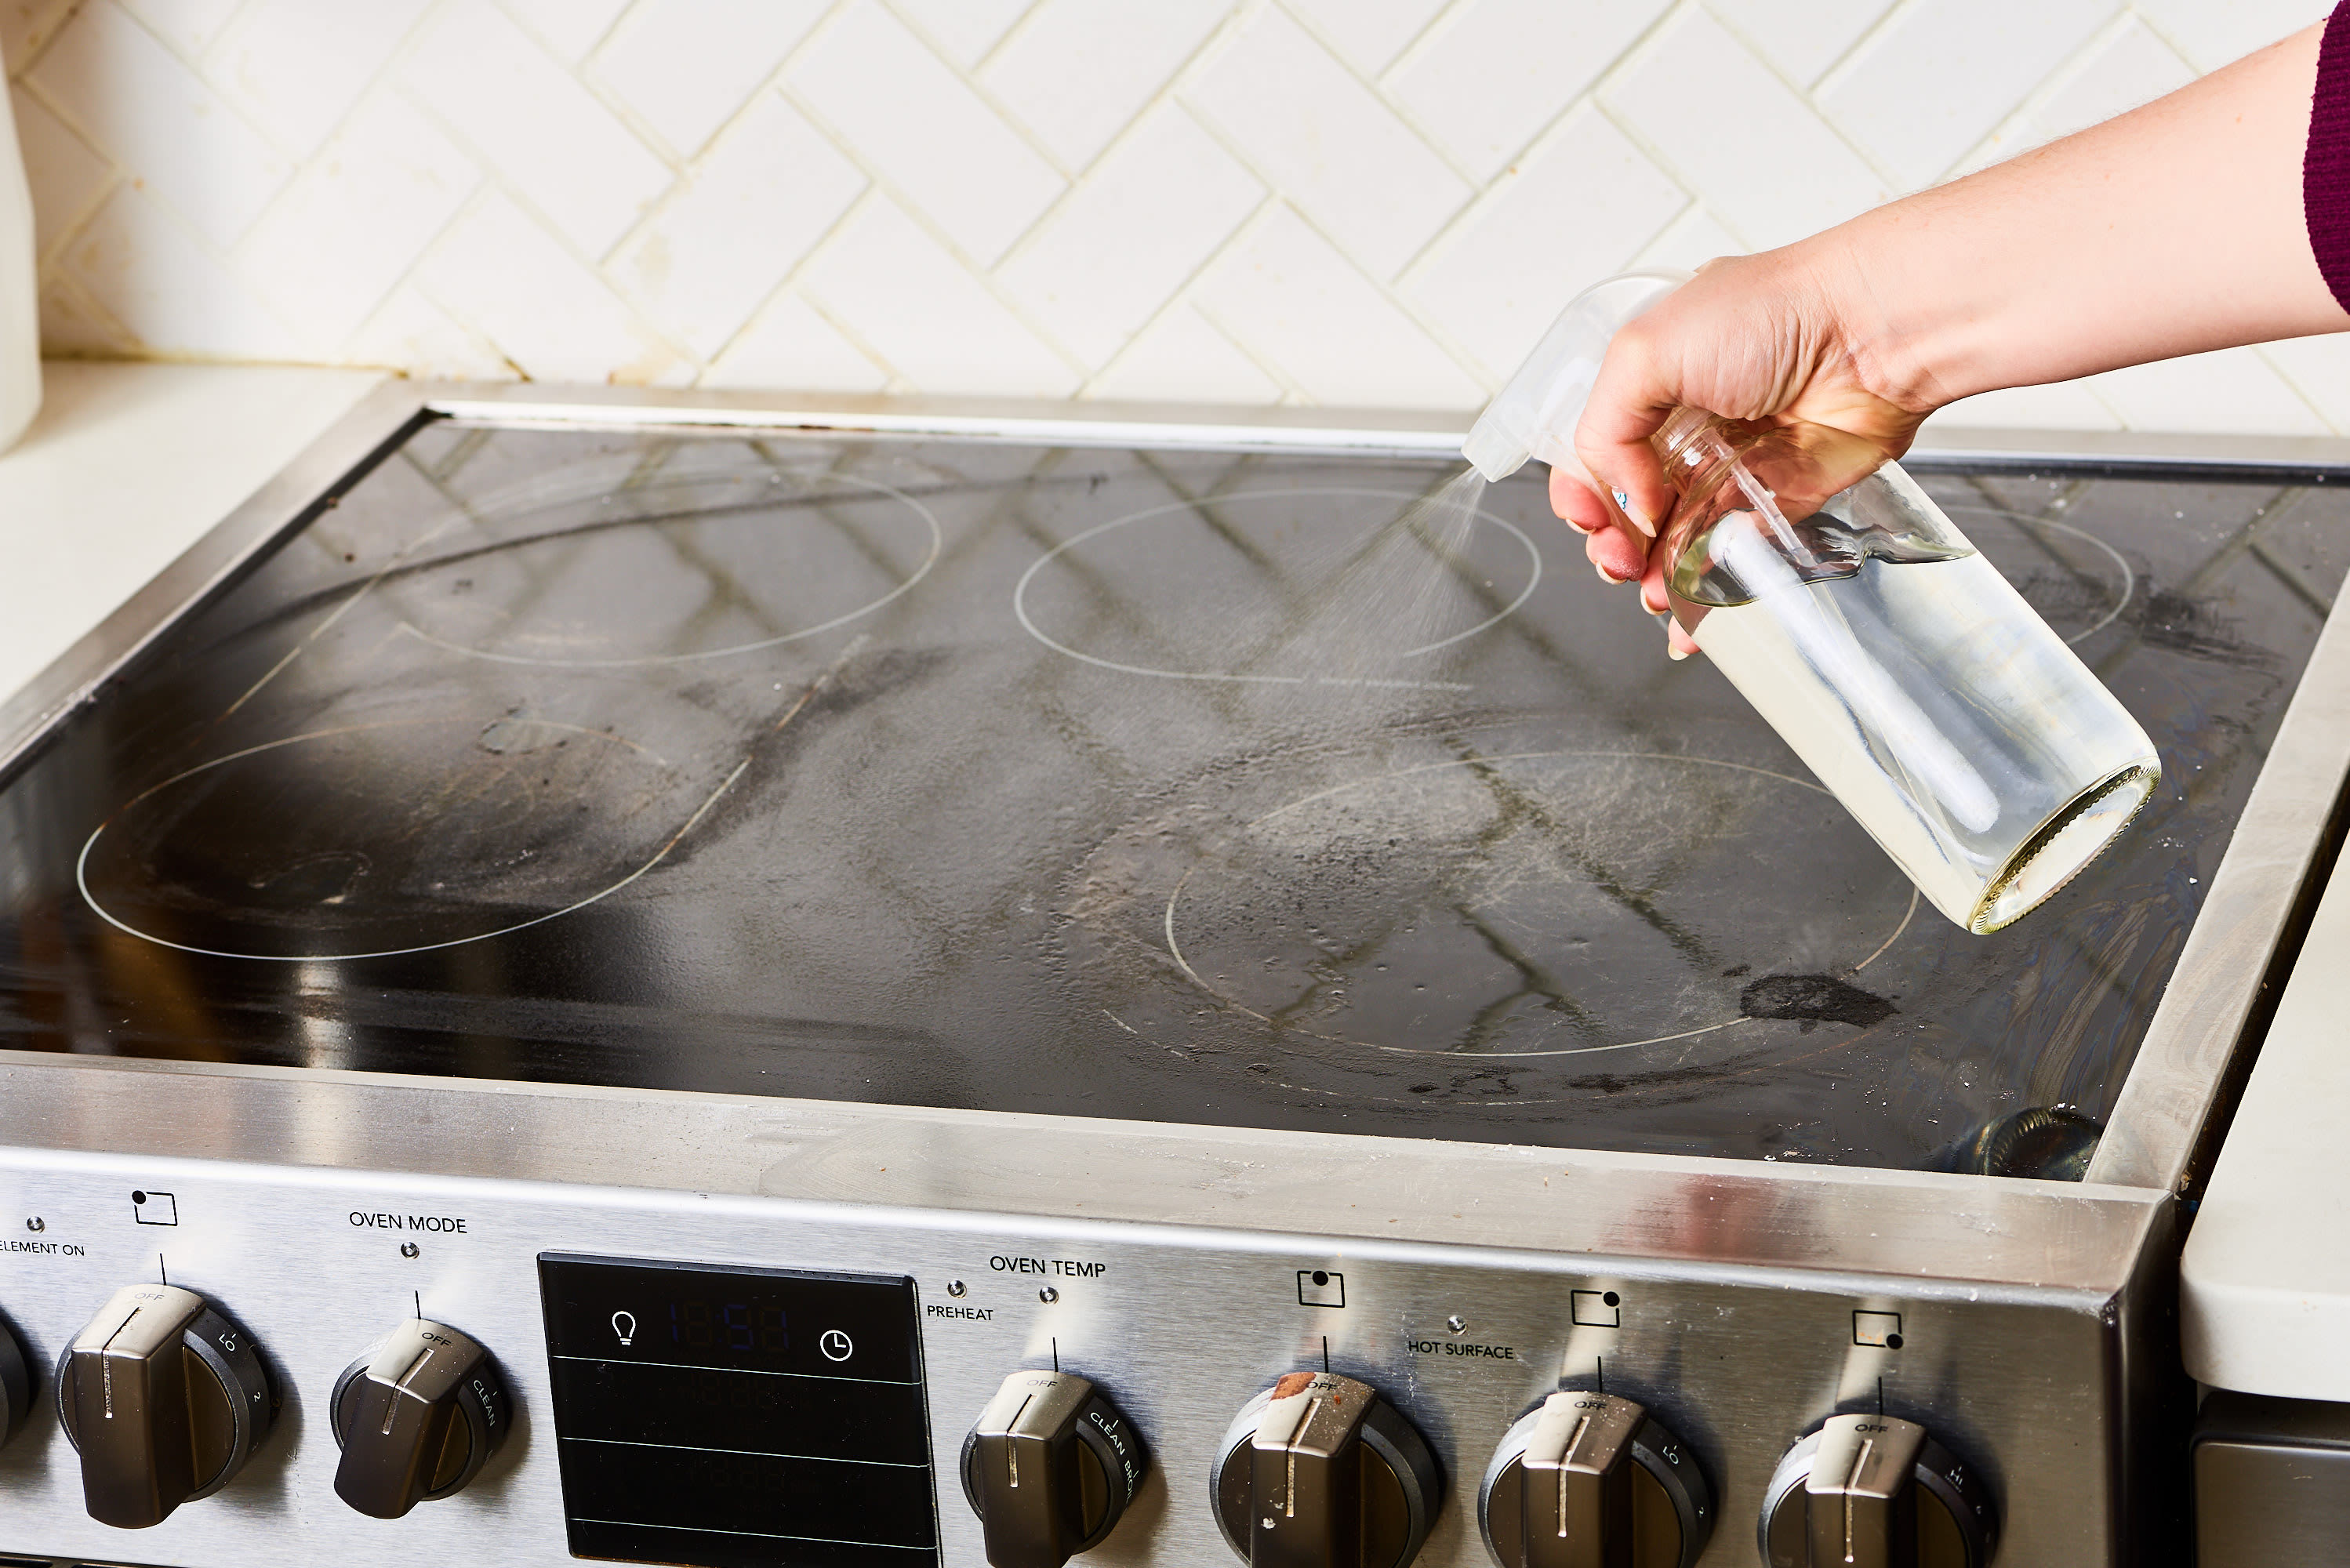 How to Clean a Glass Stovetop Without Scratching It